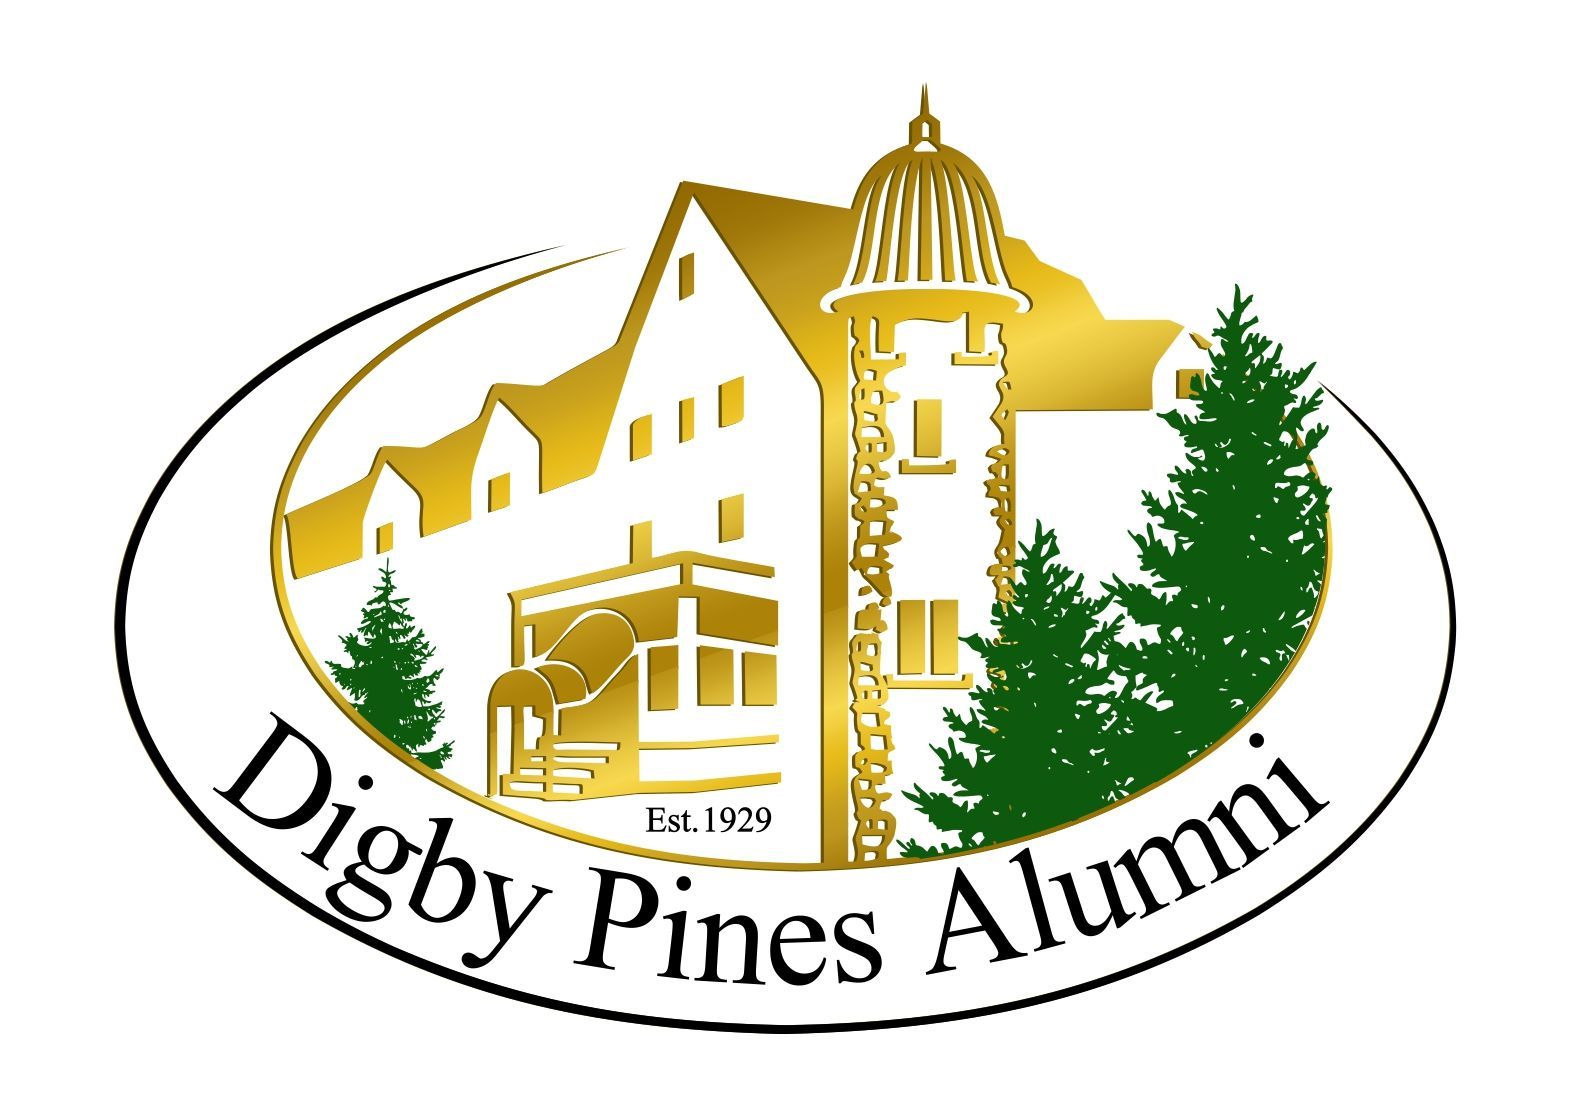 a logo for digby pines alumni with an image of the main building surrounded by pine trees